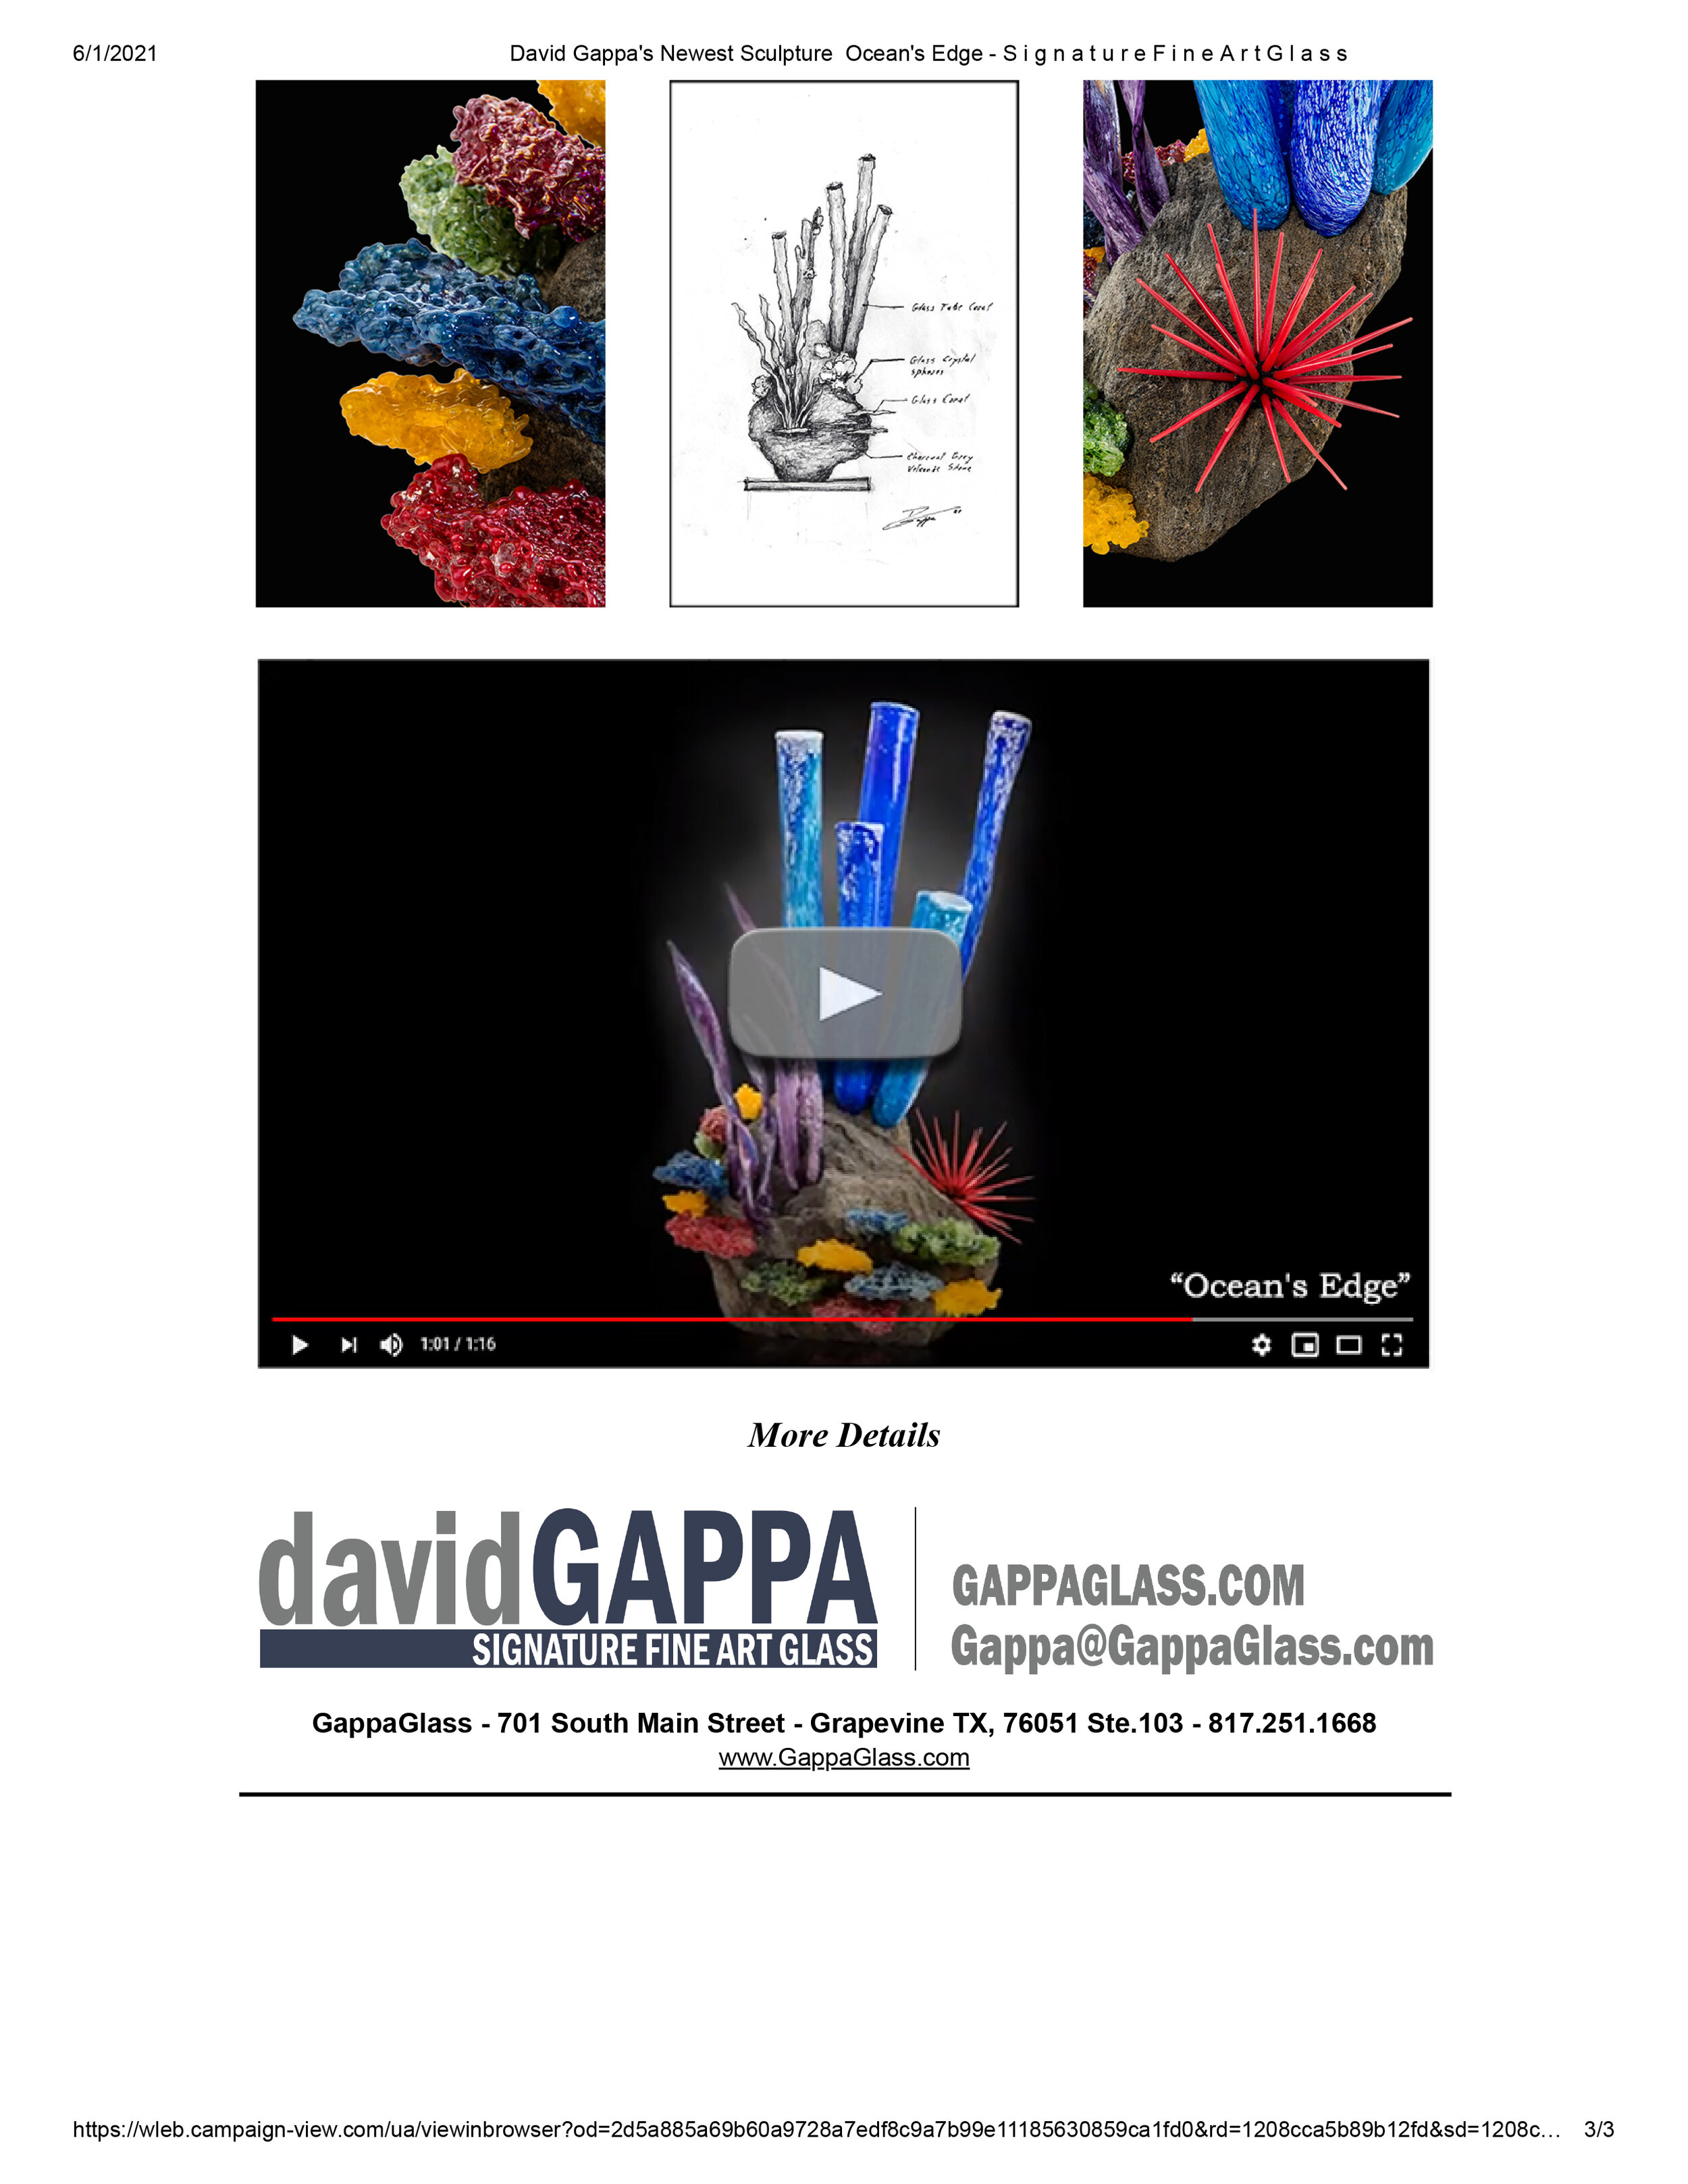 eMAIL cAMPAIGNS -David Gappa's Newest Sculpture  Ocean's Edge - S i g n a t u r e F i n e A r t G l a s s-3.jpg